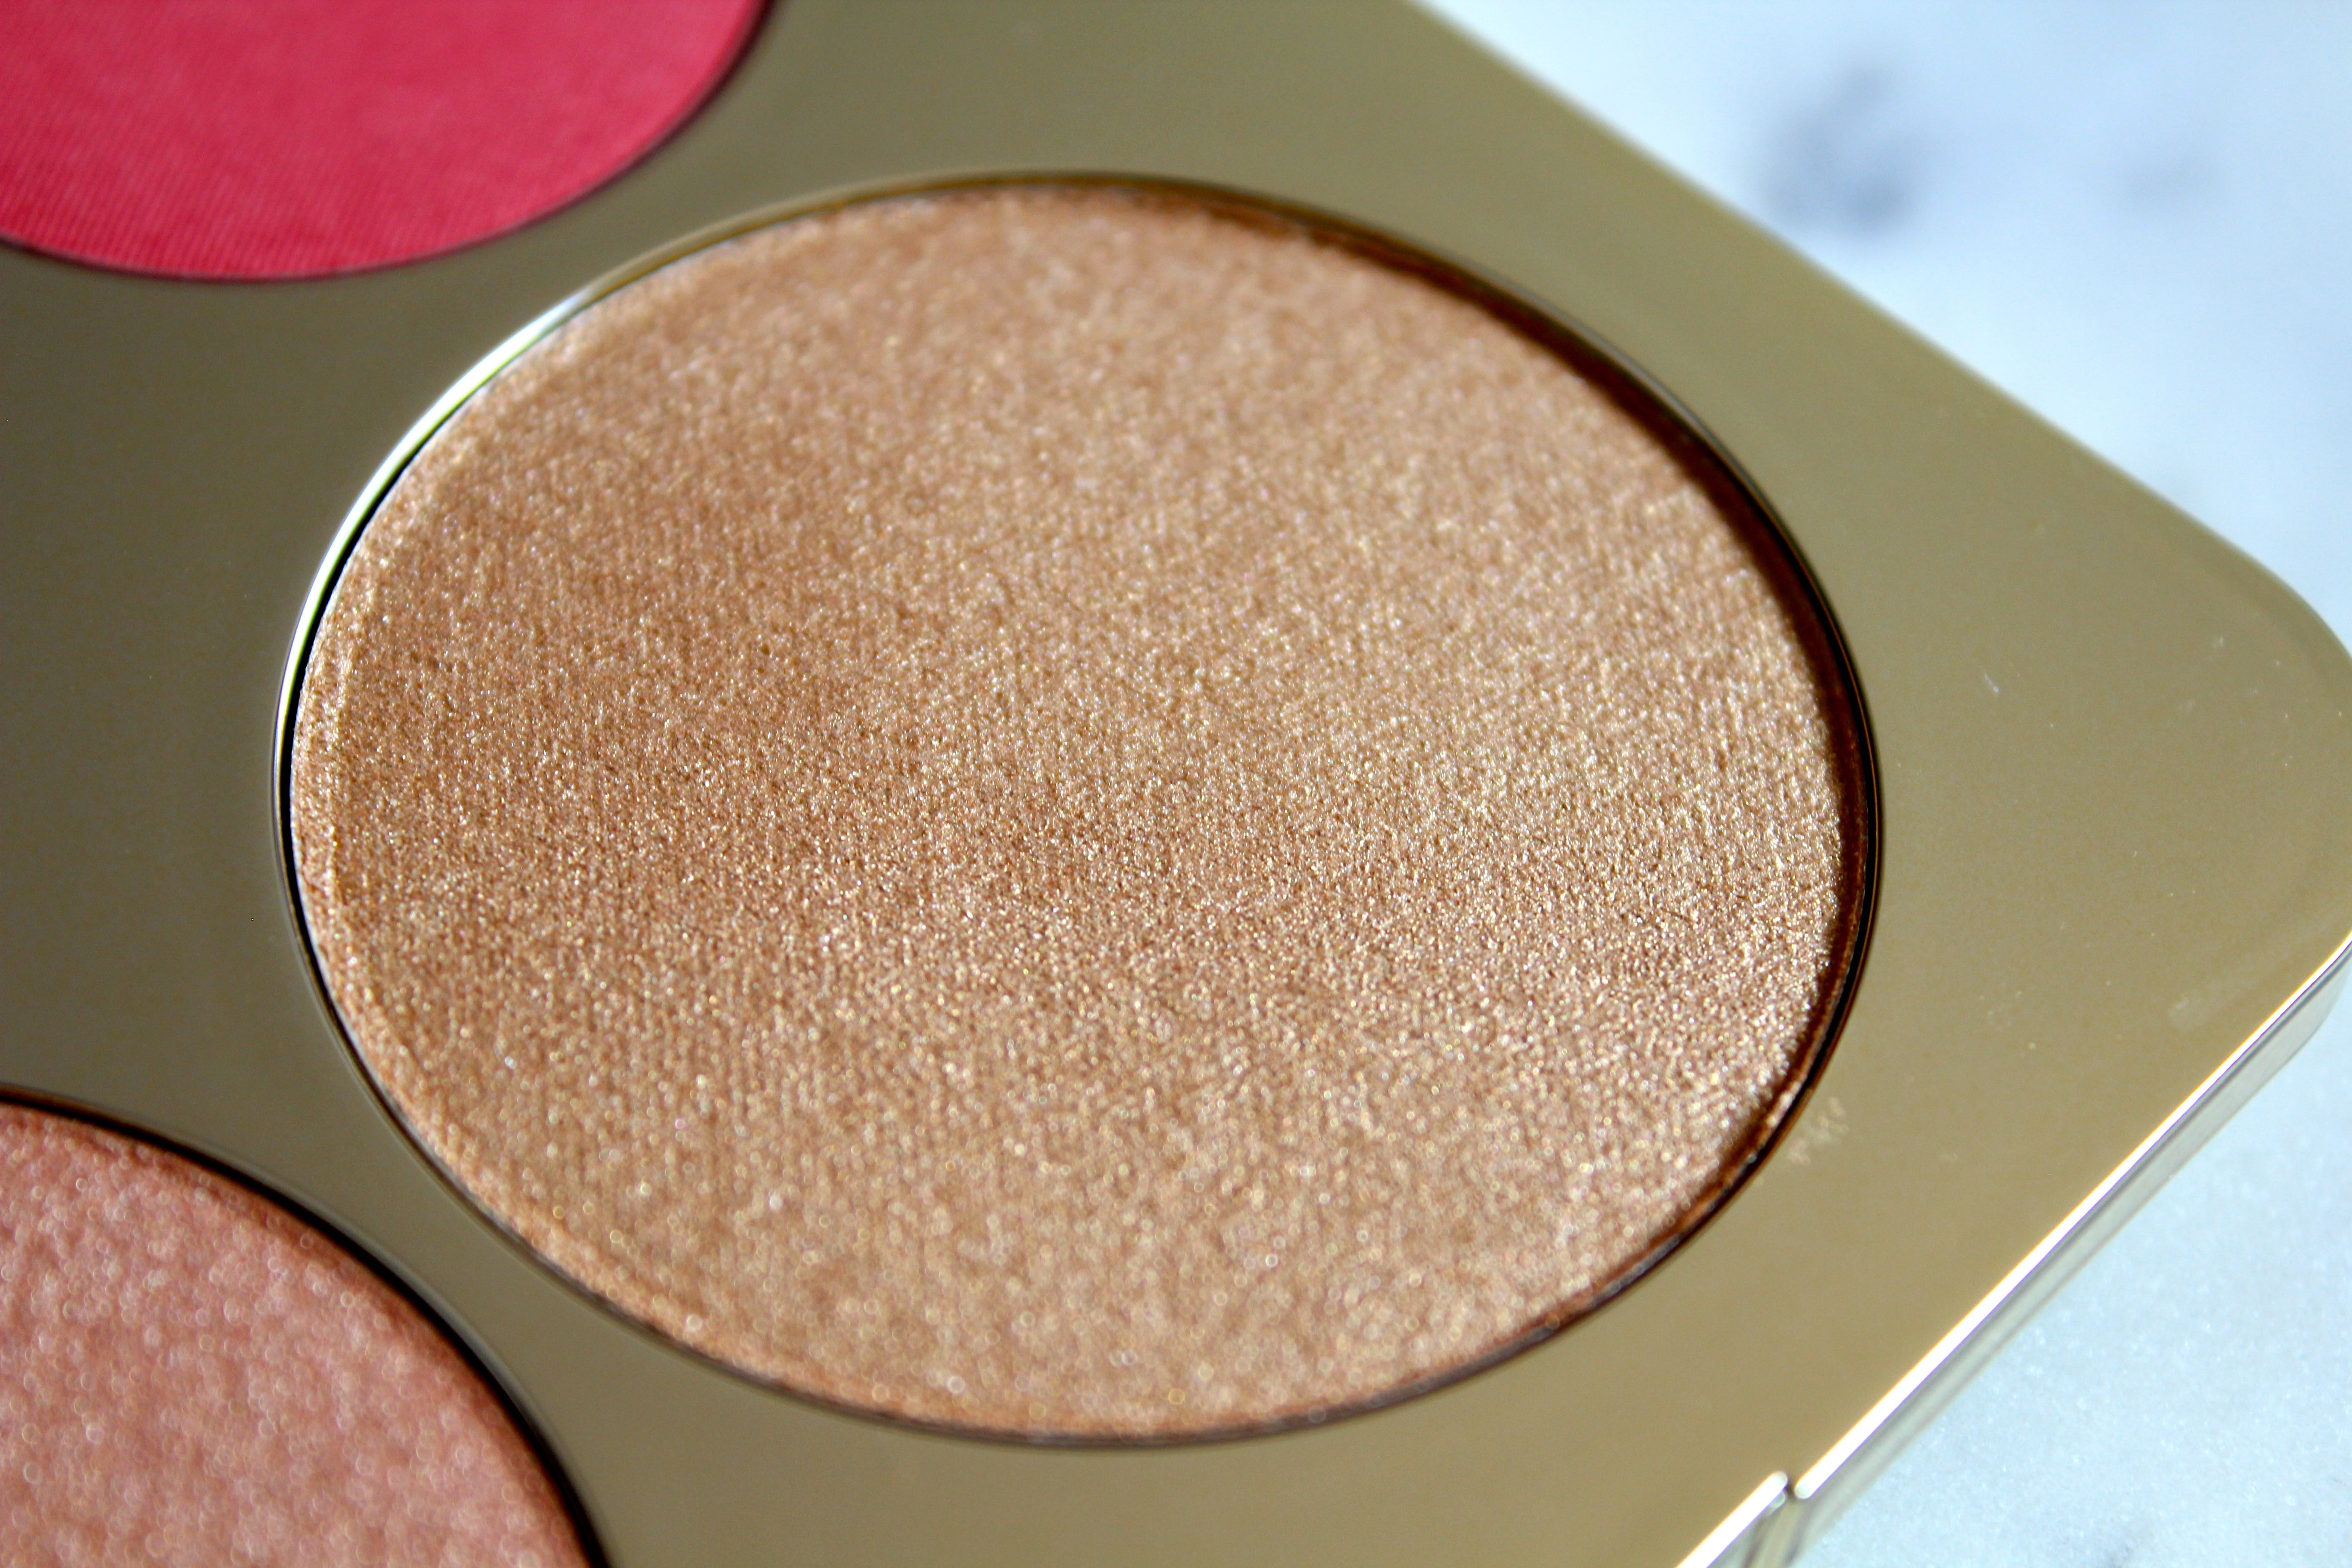 Becca X Jaclyn Hill Champagne Collection Face Palette Review & Swatches by Facemadeup.com